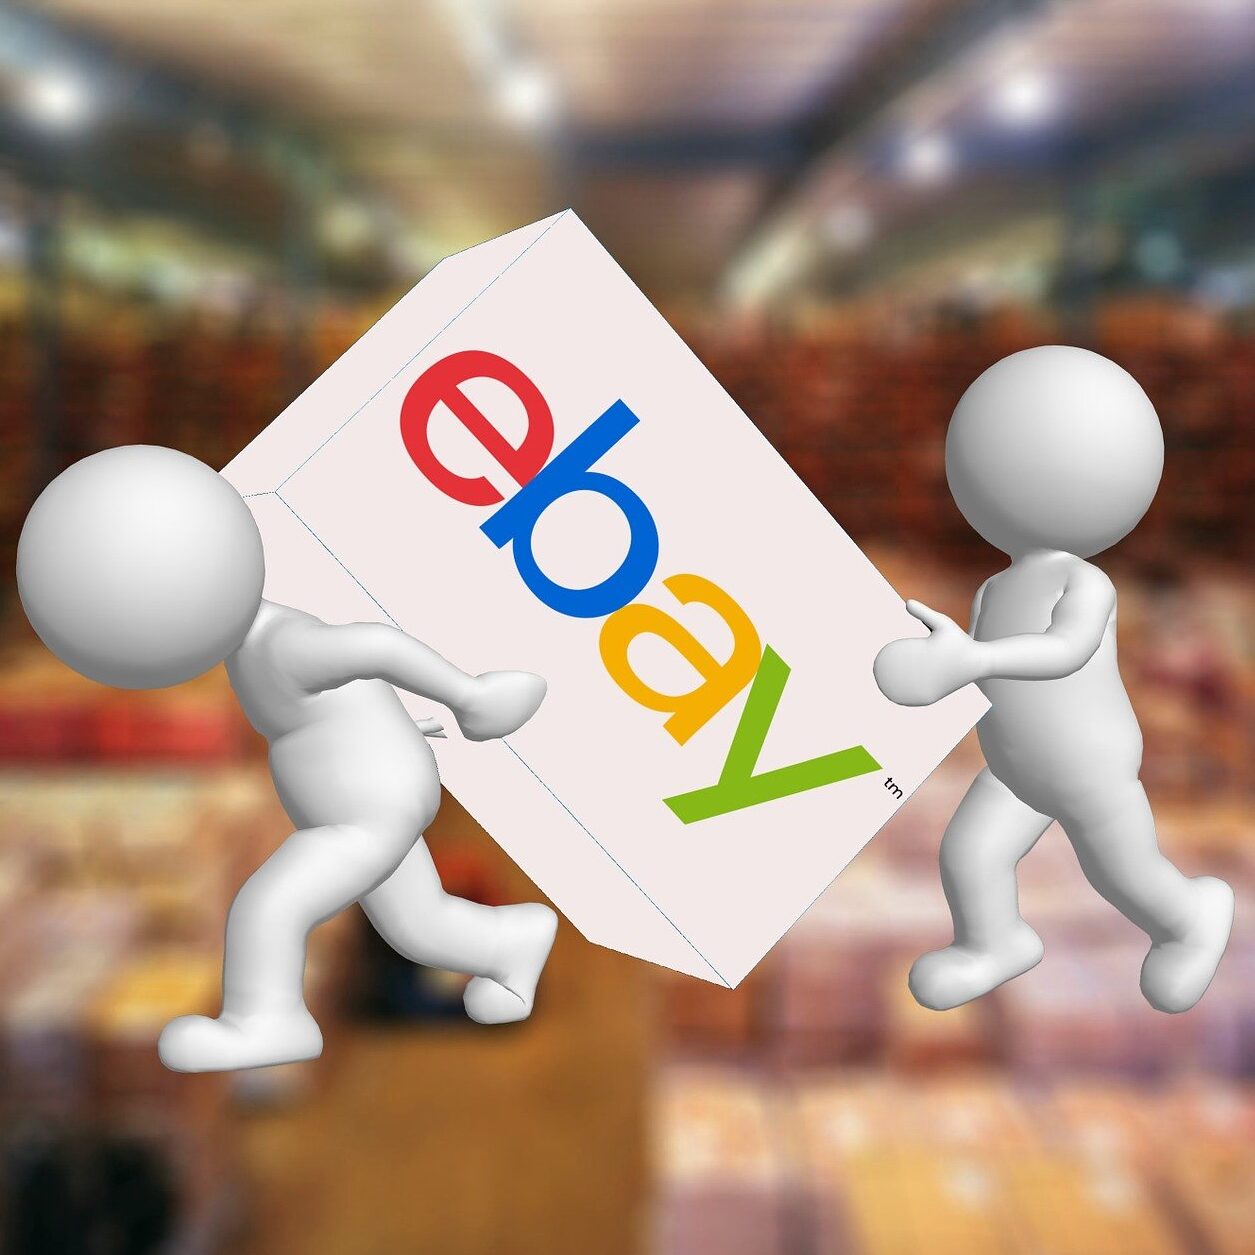 eBay Selling Service and Trading Business